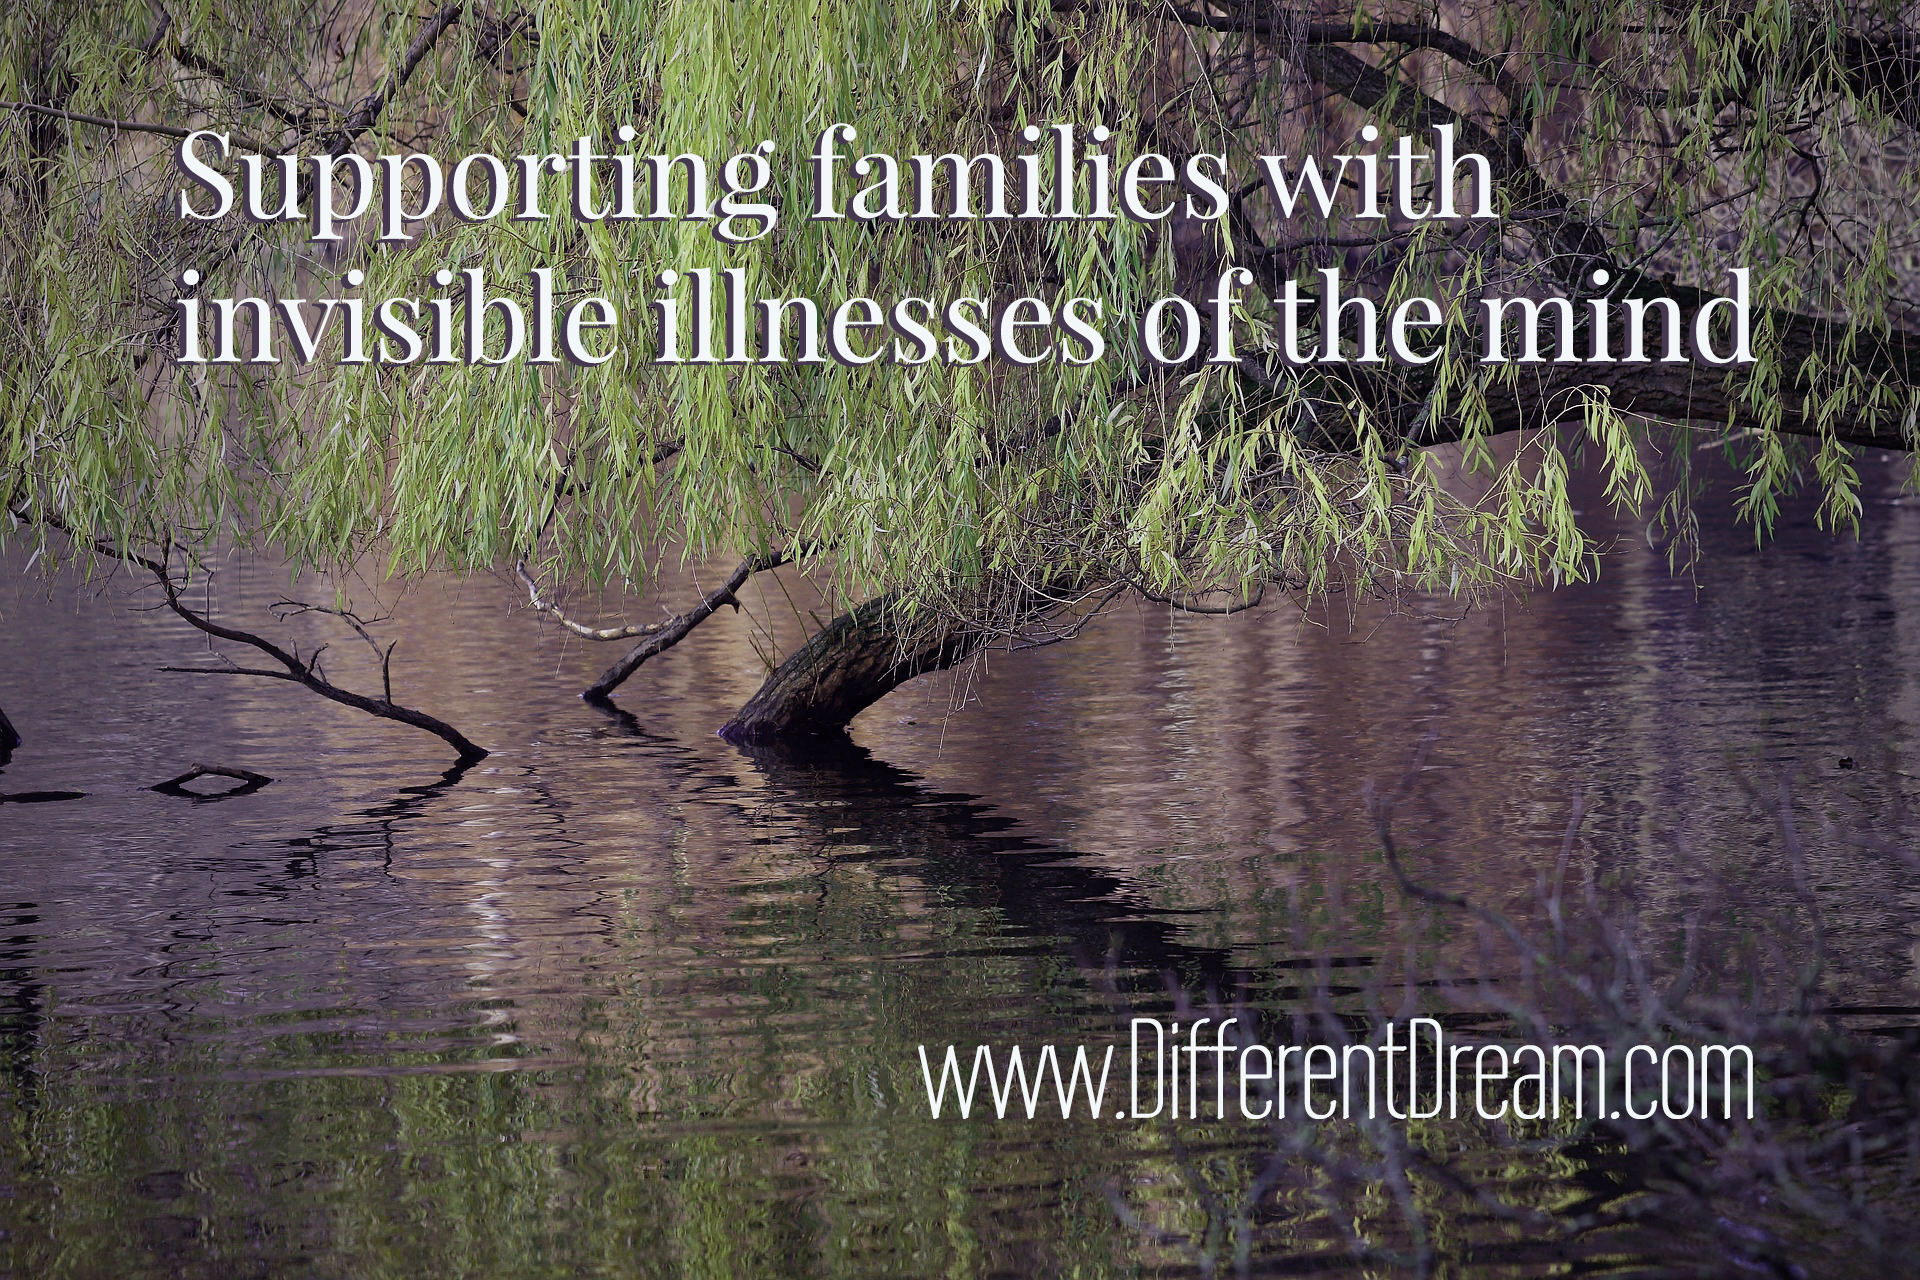 Christians parenting the mentally ill need other believers to support them. Lisa Pelissier introduces a new blog to support such families.